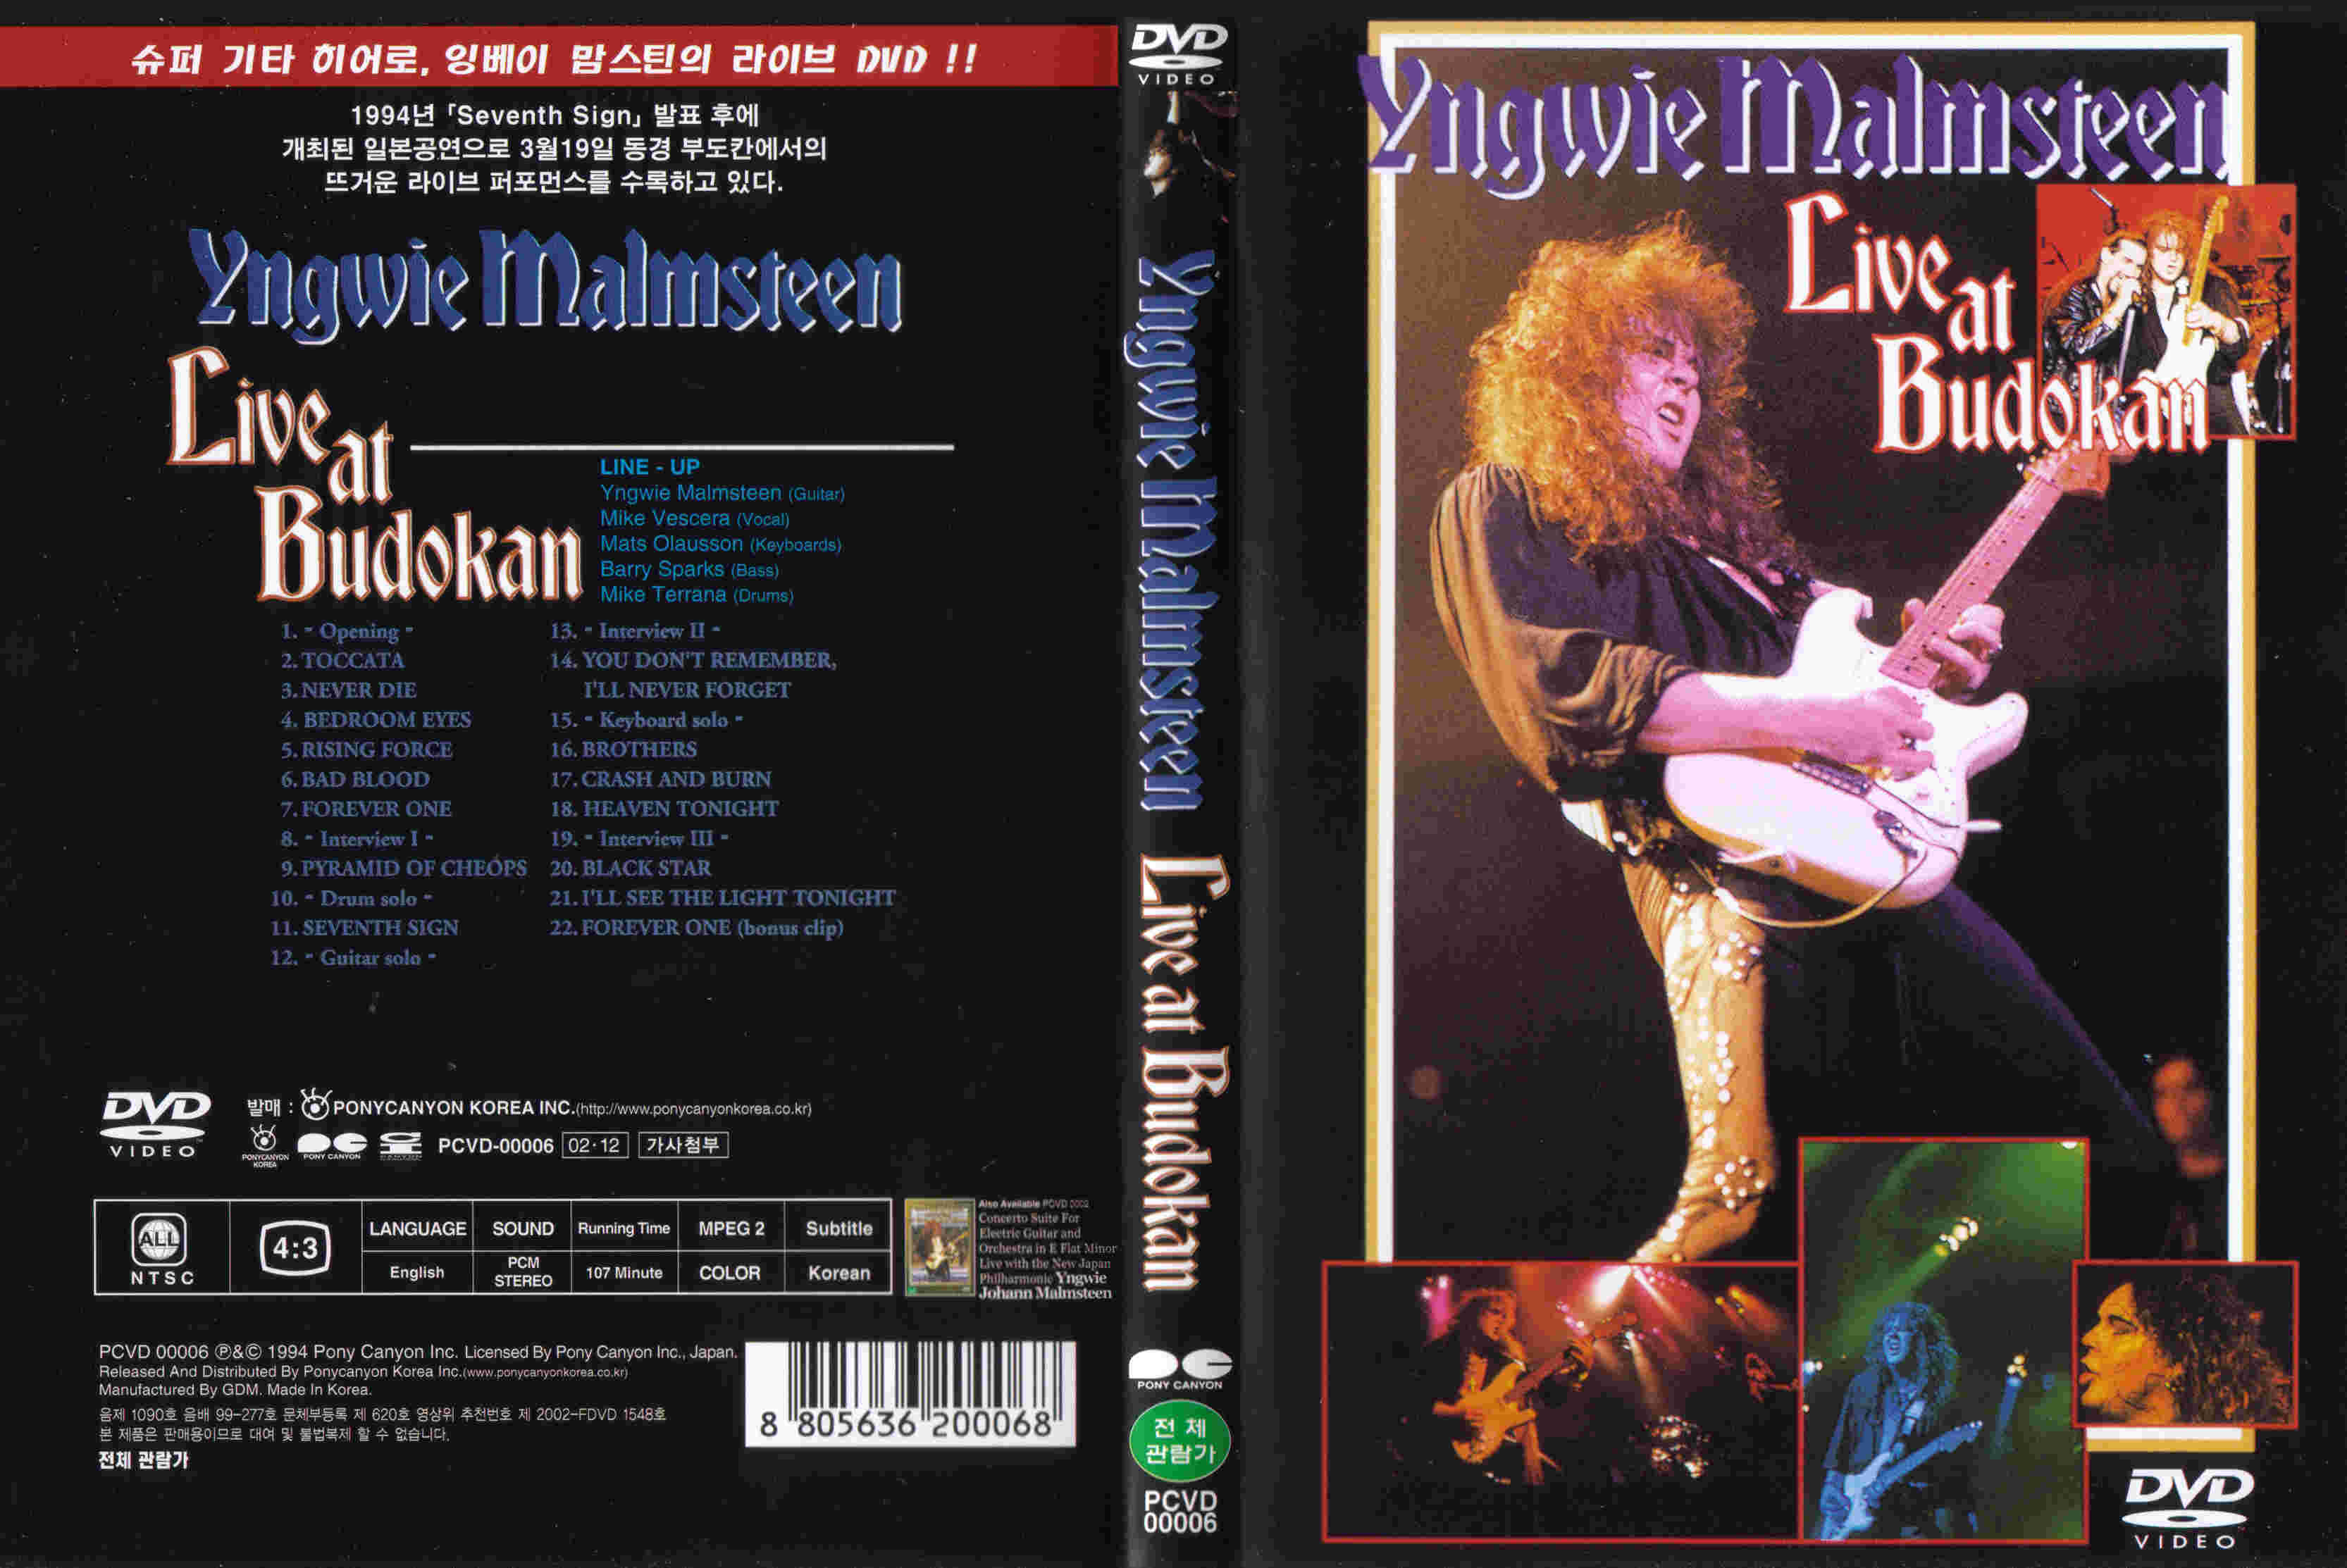 Yngwie Malmsteen Live At Budokan 94 : Front | DVD Covers | Cover